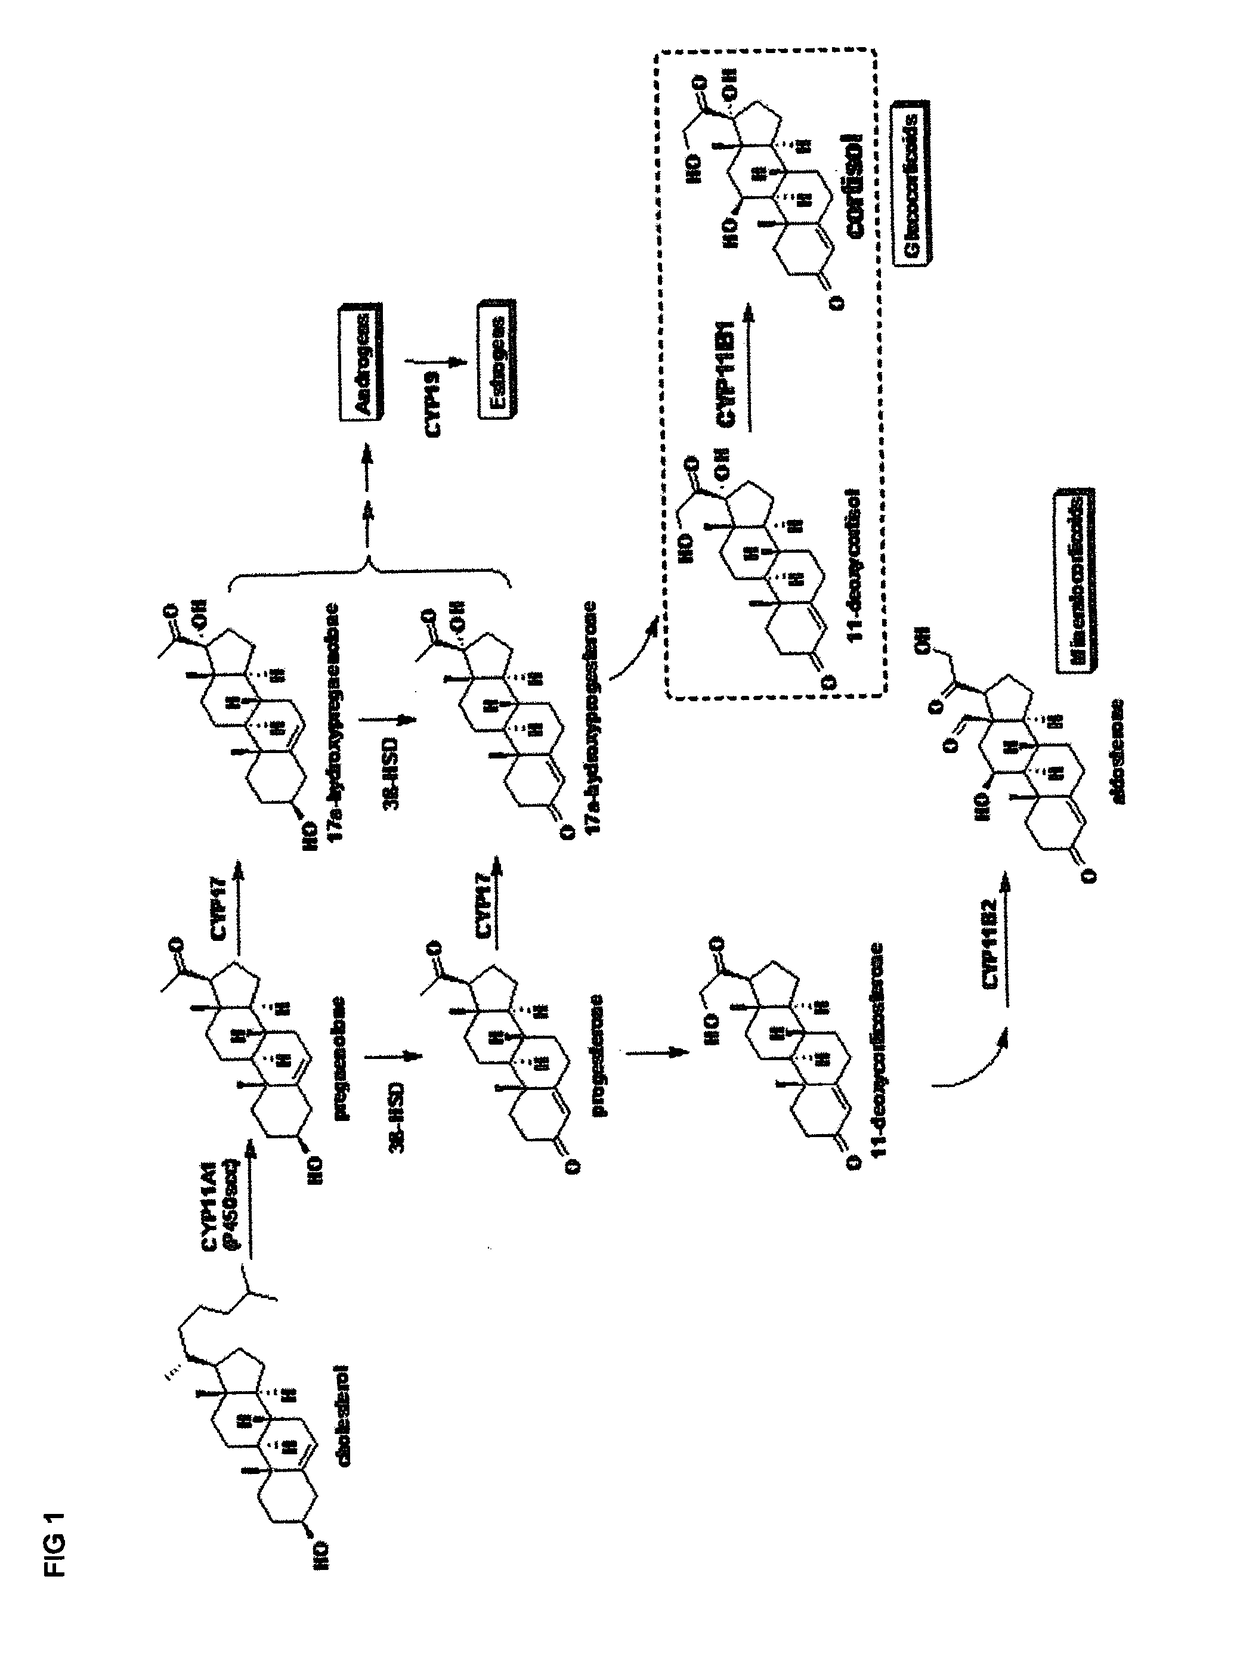 A plant extract and compounds for use in wound healing